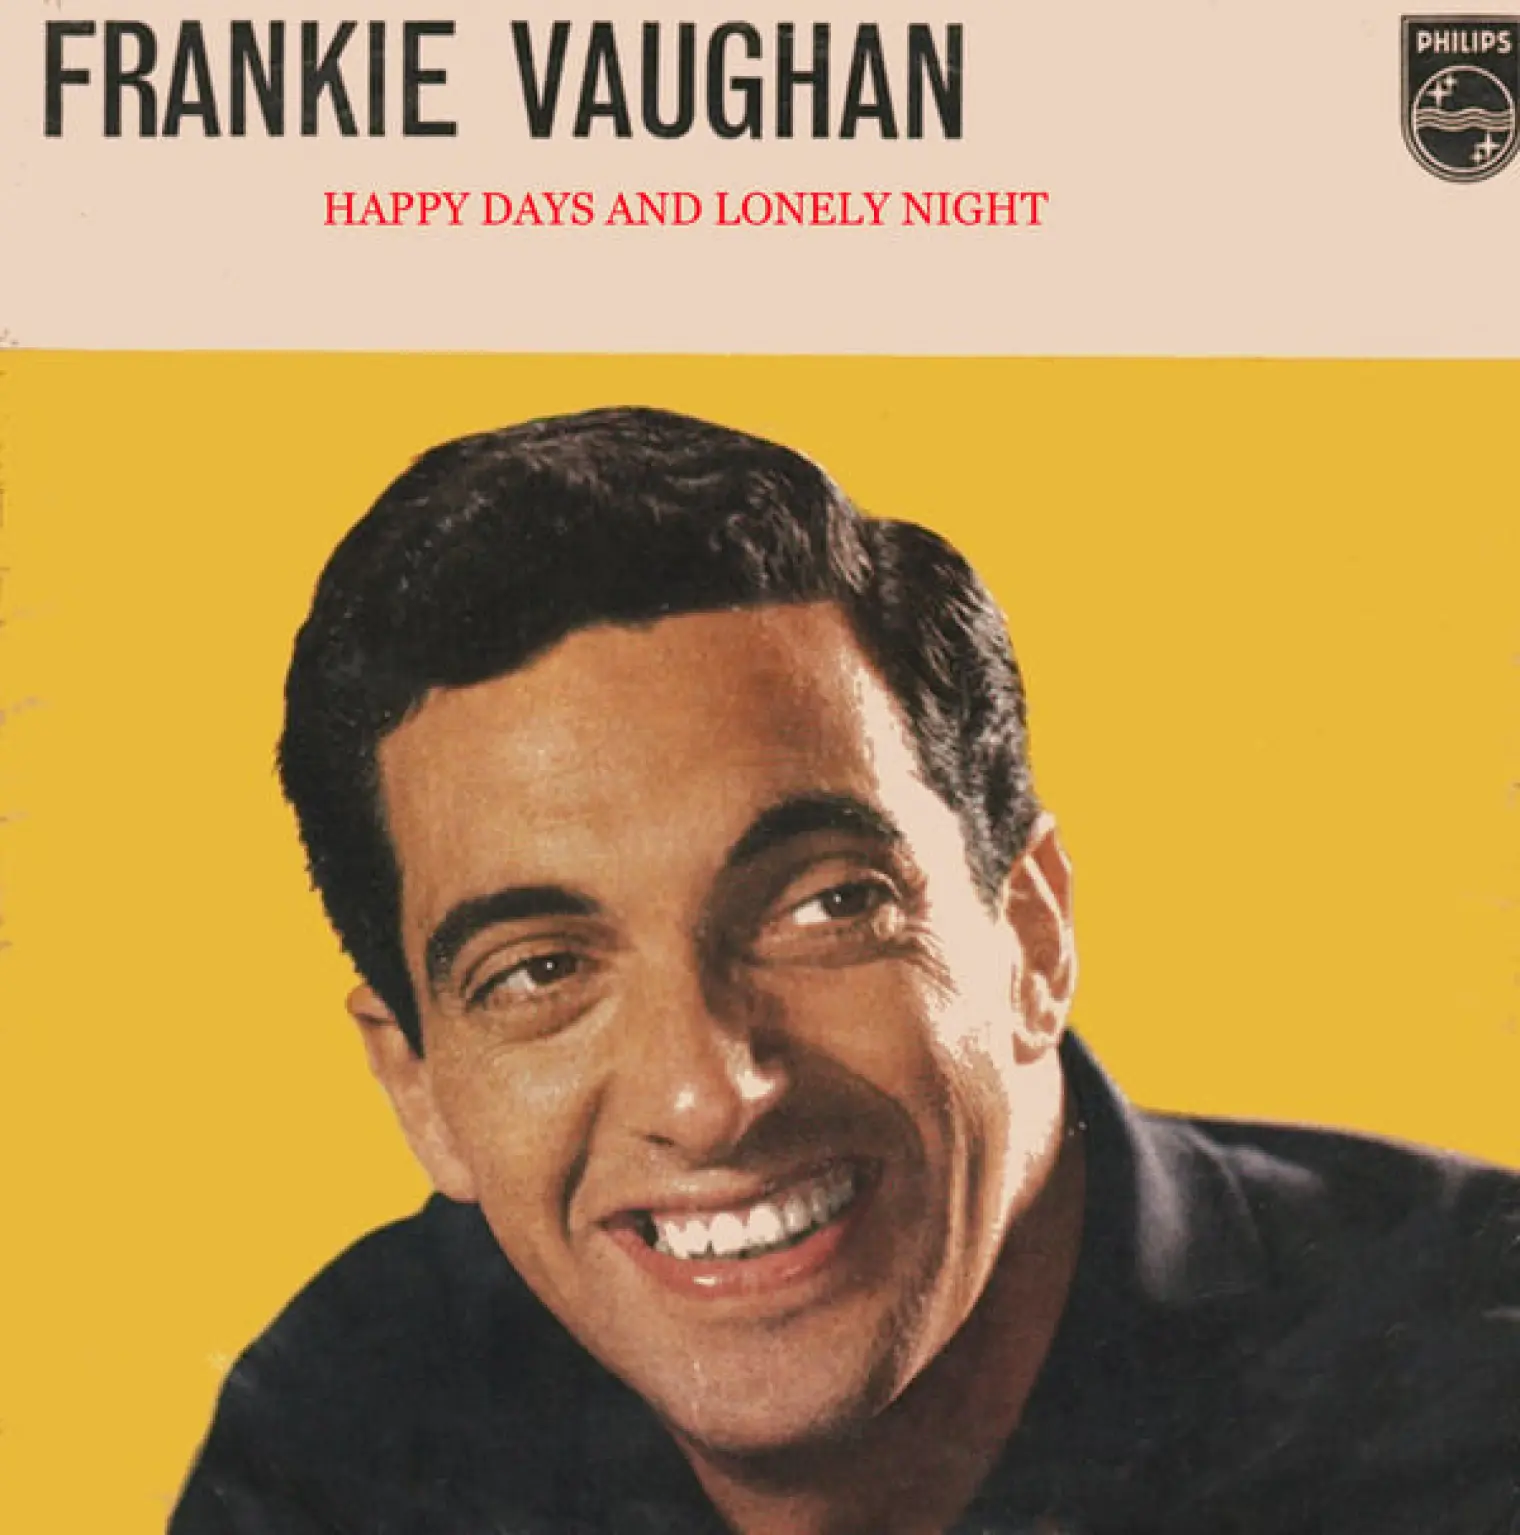 Happy Days And Lonely Nights -  Frankie Vaughan 